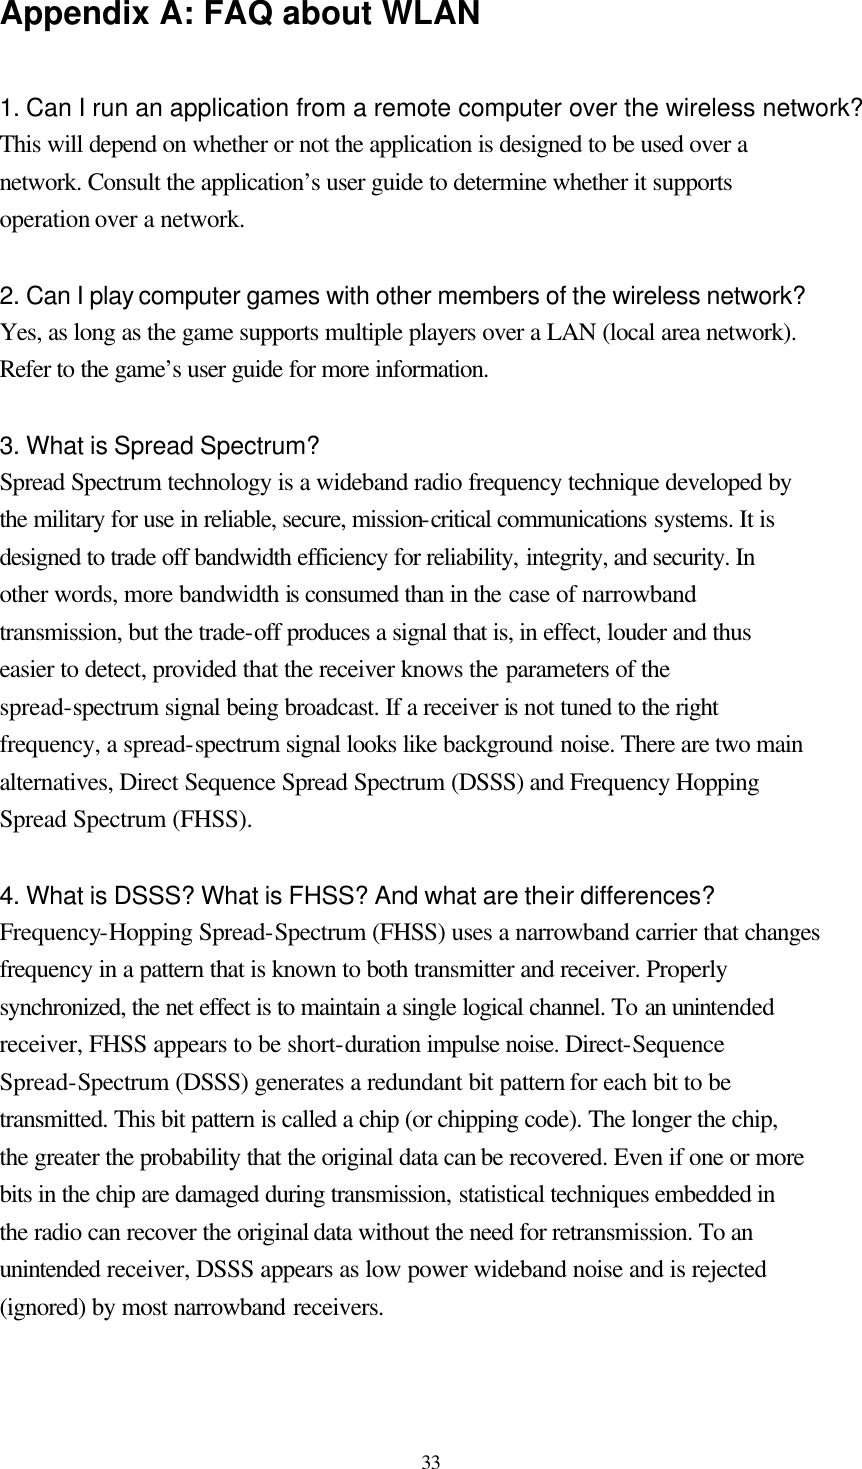  33 Appendix A: FAQ about WLAN  1. Can I run an application from a remote computer over the wireless network? This will depend on whether or not the application is designed to be used over a network. Consult the application’s user guide to determine whether it supports operation over a network.  2. Can I play computer games with other members of the wireless network? Yes, as long as the game supports multiple players over a LAN (local area network). Refer to the game’s user guide for more information.  3. What is Spread Spectrum? Spread Spectrum technology is a wideband radio frequency technique developed by the military for use in reliable, secure, mission-critical communications systems. It is designed to trade off bandwidth efficiency for reliability, integrity, and security. In other words, more bandwidth is consumed than in the case of narrowband transmission, but the trade-off produces a signal that is, in effect, louder and thus easier to detect, provided that the receiver knows the parameters of the spread-spectrum signal being broadcast. If a receiver is not tuned to the right frequency, a spread-spectrum signal looks like background noise. There are two main alternatives, Direct Sequence Spread Spectrum (DSSS) and Frequency Hopping Spread Spectrum (FHSS).  4. What is DSSS? What is FHSS? And what are their differences? Frequency-Hopping Spread-Spectrum (FHSS) uses a narrowband carrier that changes frequency in a pattern that is known to both transmitter and receiver. Properly synchronized, the net effect is to maintain a single logical channel. To an unintended receiver, FHSS appears to be short-duration impulse noise. Direct-Sequence Spread-Spectrum (DSSS) generates a redundant bit pattern for each bit to be transmitted. This bit pattern is called a chip (or chipping code). The longer the chip, the greater the probability that the original data can be recovered. Even if one or more bits in the chip are damaged during transmission, statistical techniques embedded in the radio can recover the original data without the need for retransmission. To an unintended receiver, DSSS appears as low power wideband noise and is rejected (ignored) by most narrowband receivers.  